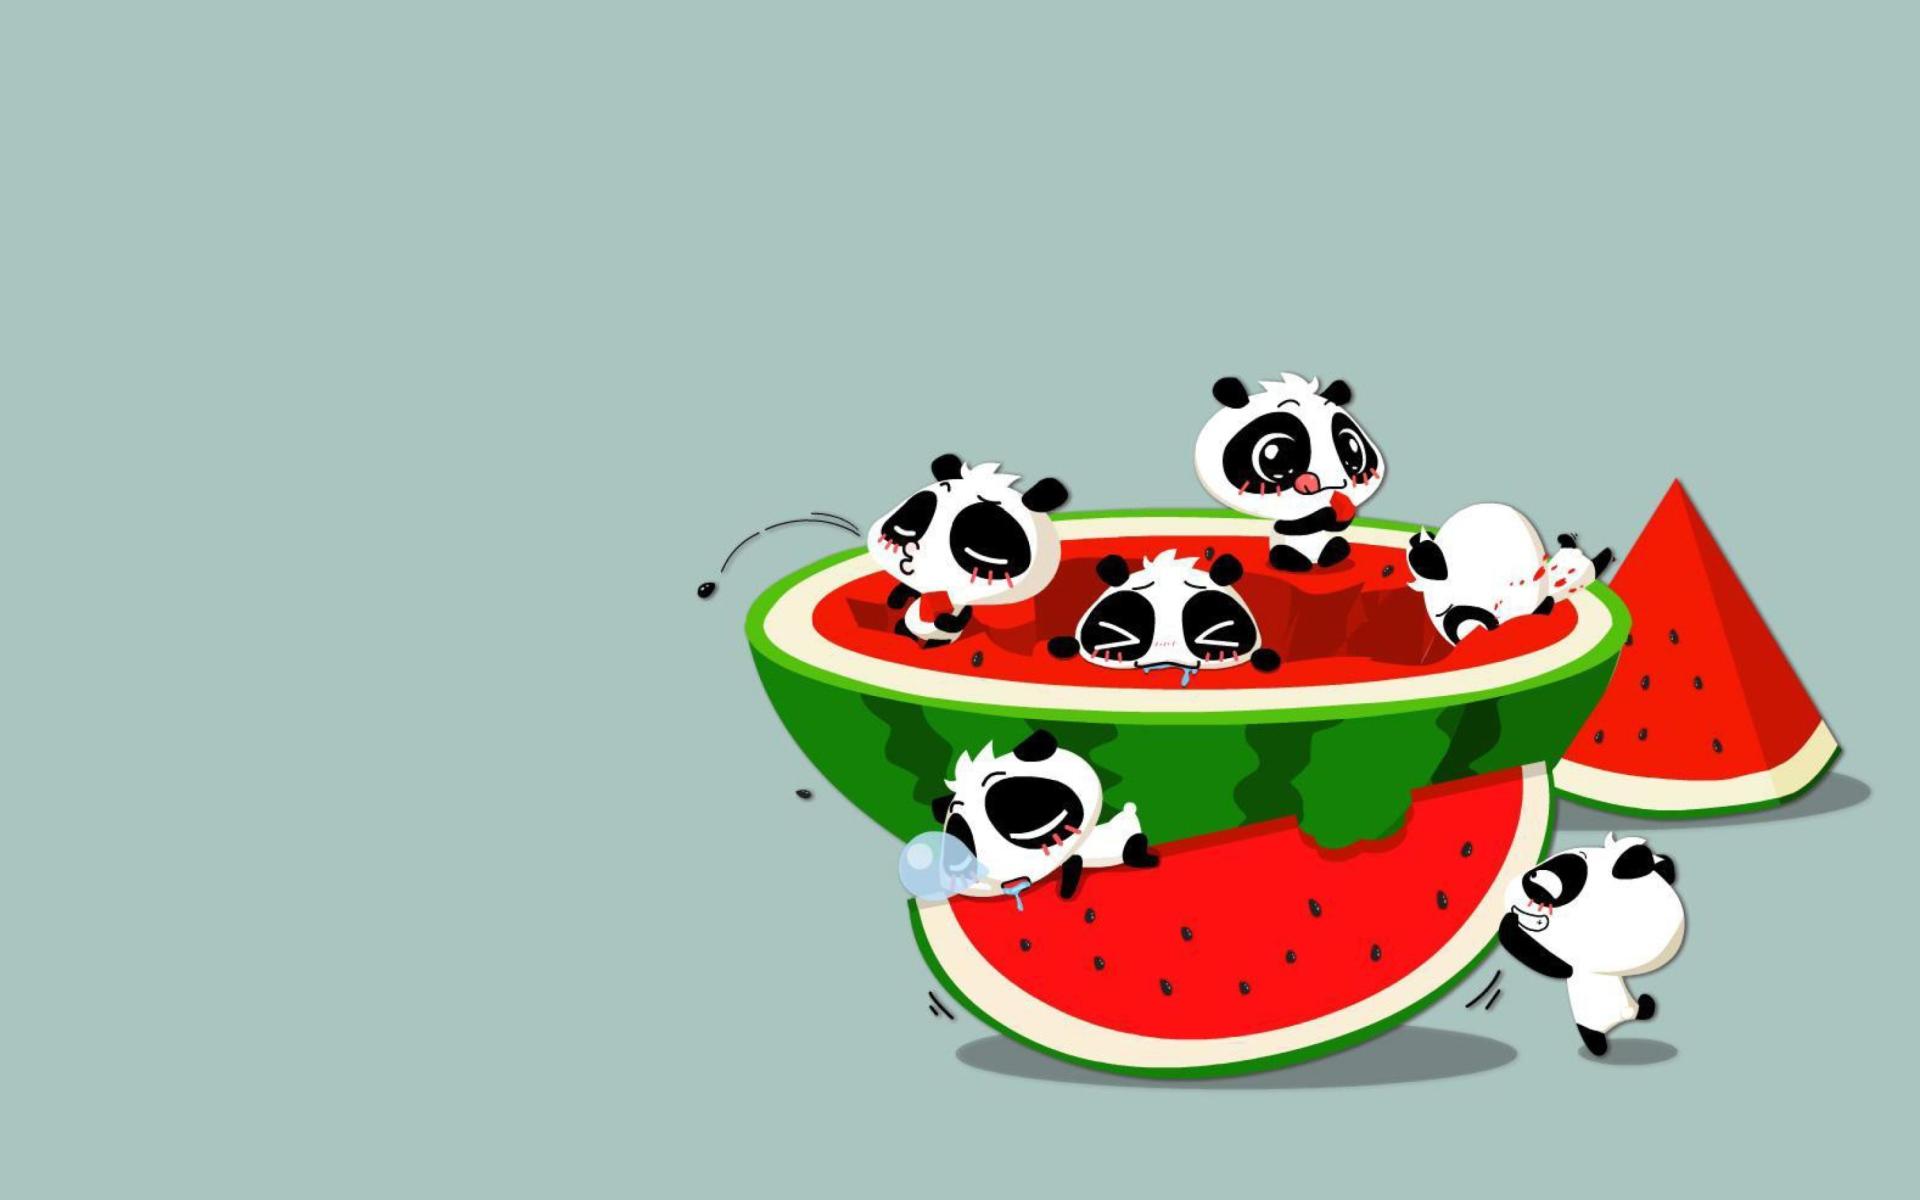 Animated Wallpaper Of Tiny Adorable Little Pandas Eating